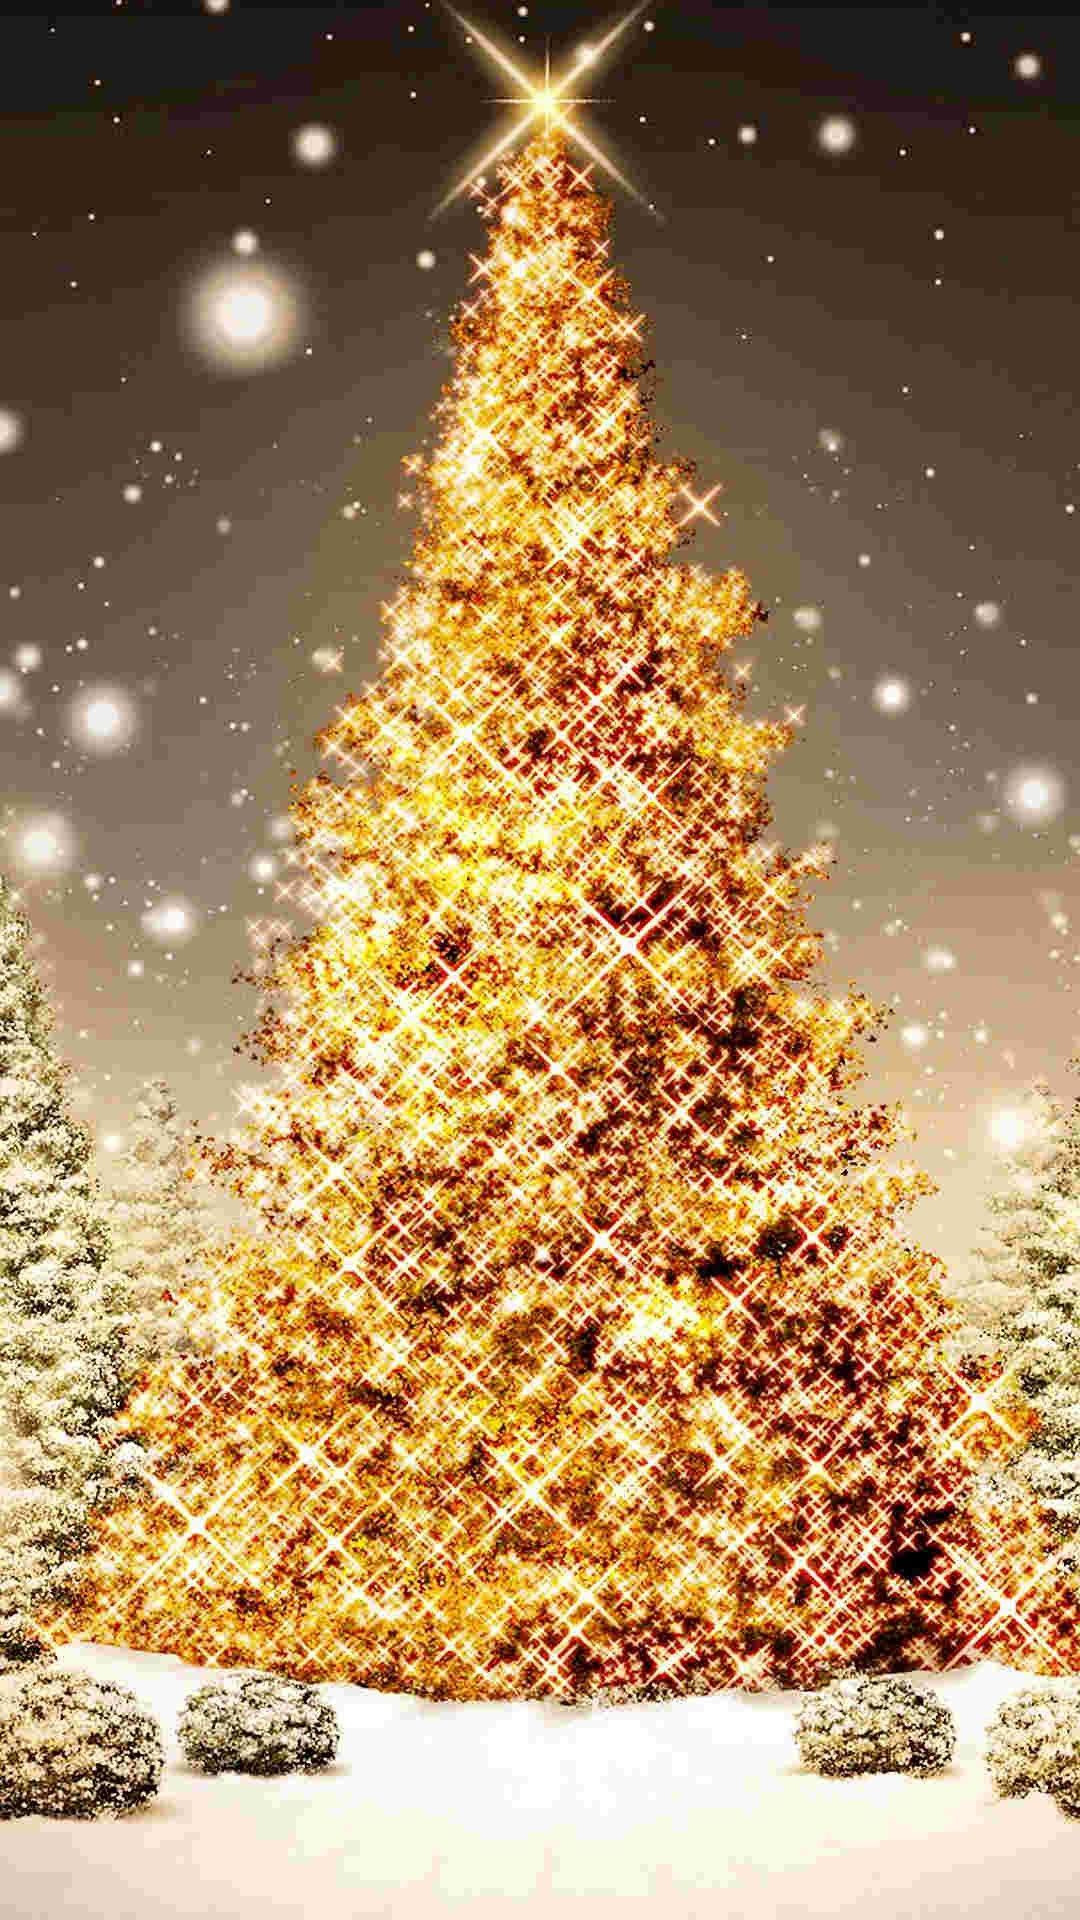 gold bling 2014 Christmas tree iPhone 6 plus wallpaper for girls # Christmas. Wallpaper iphone christmas, Christmas wallpaper hd, Christmas tree wallpaper